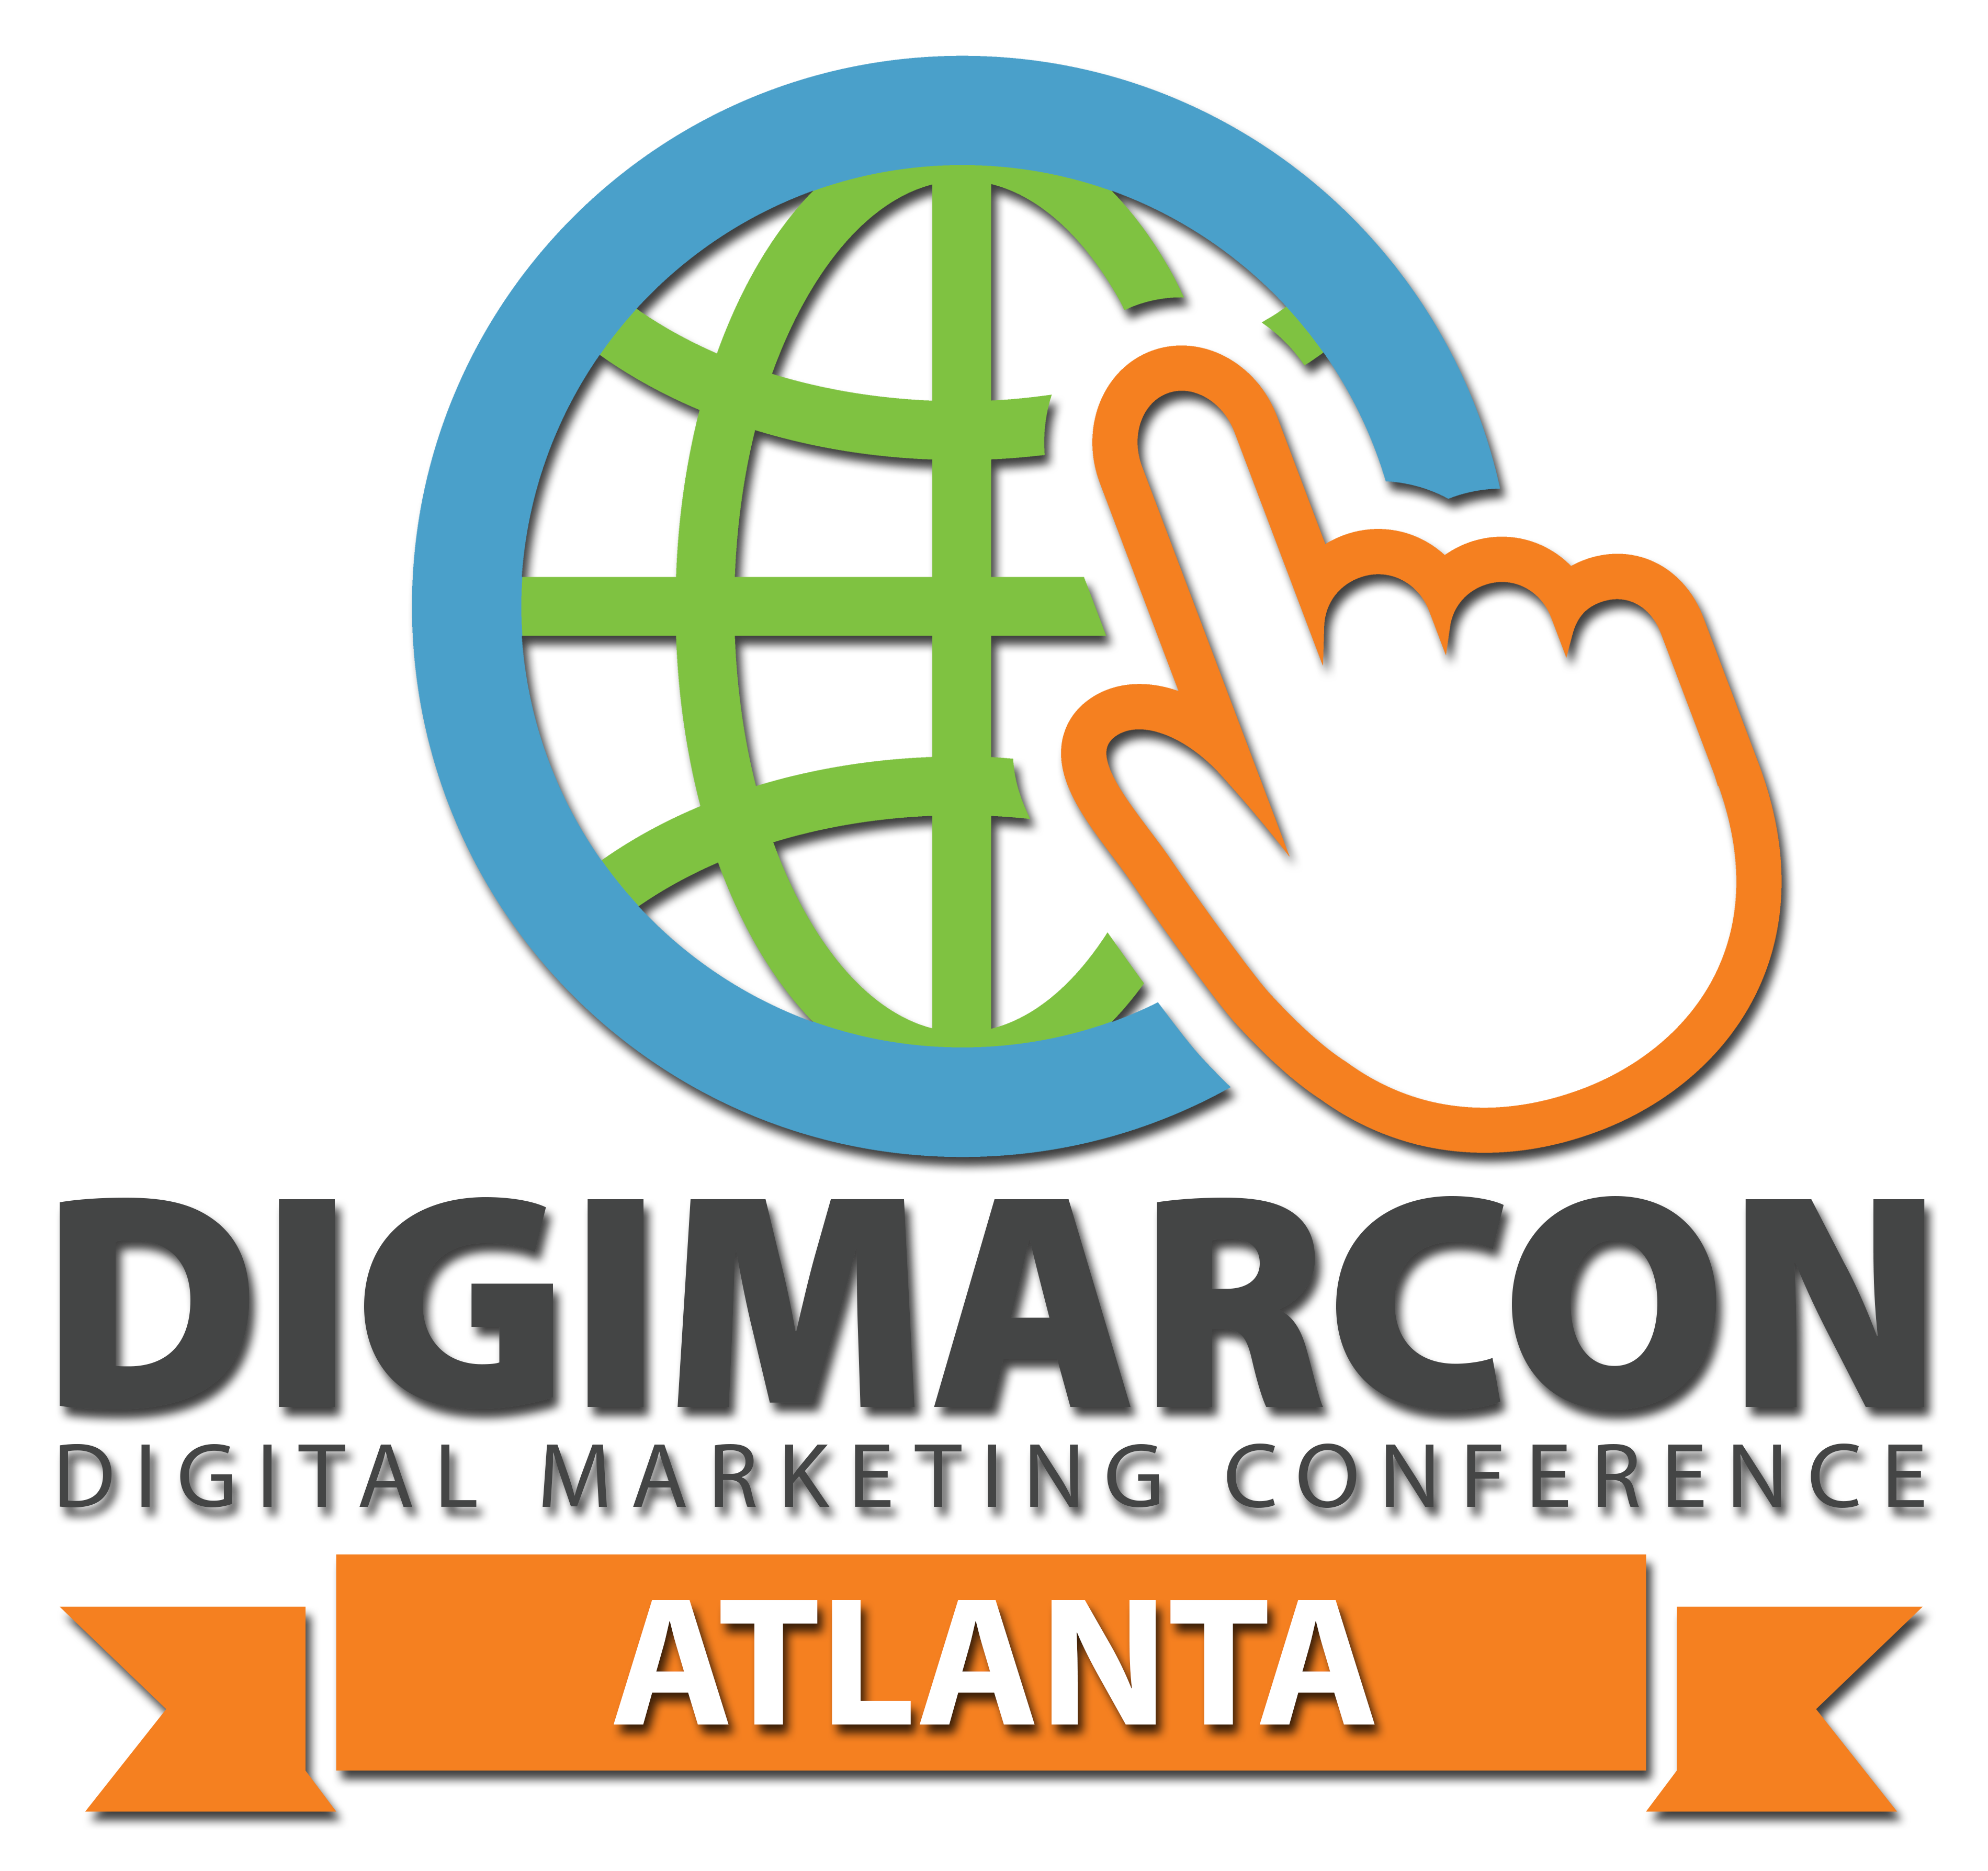 DigiMarCon South – Digital Marketing, Media and Advertising Conference & Exhibition